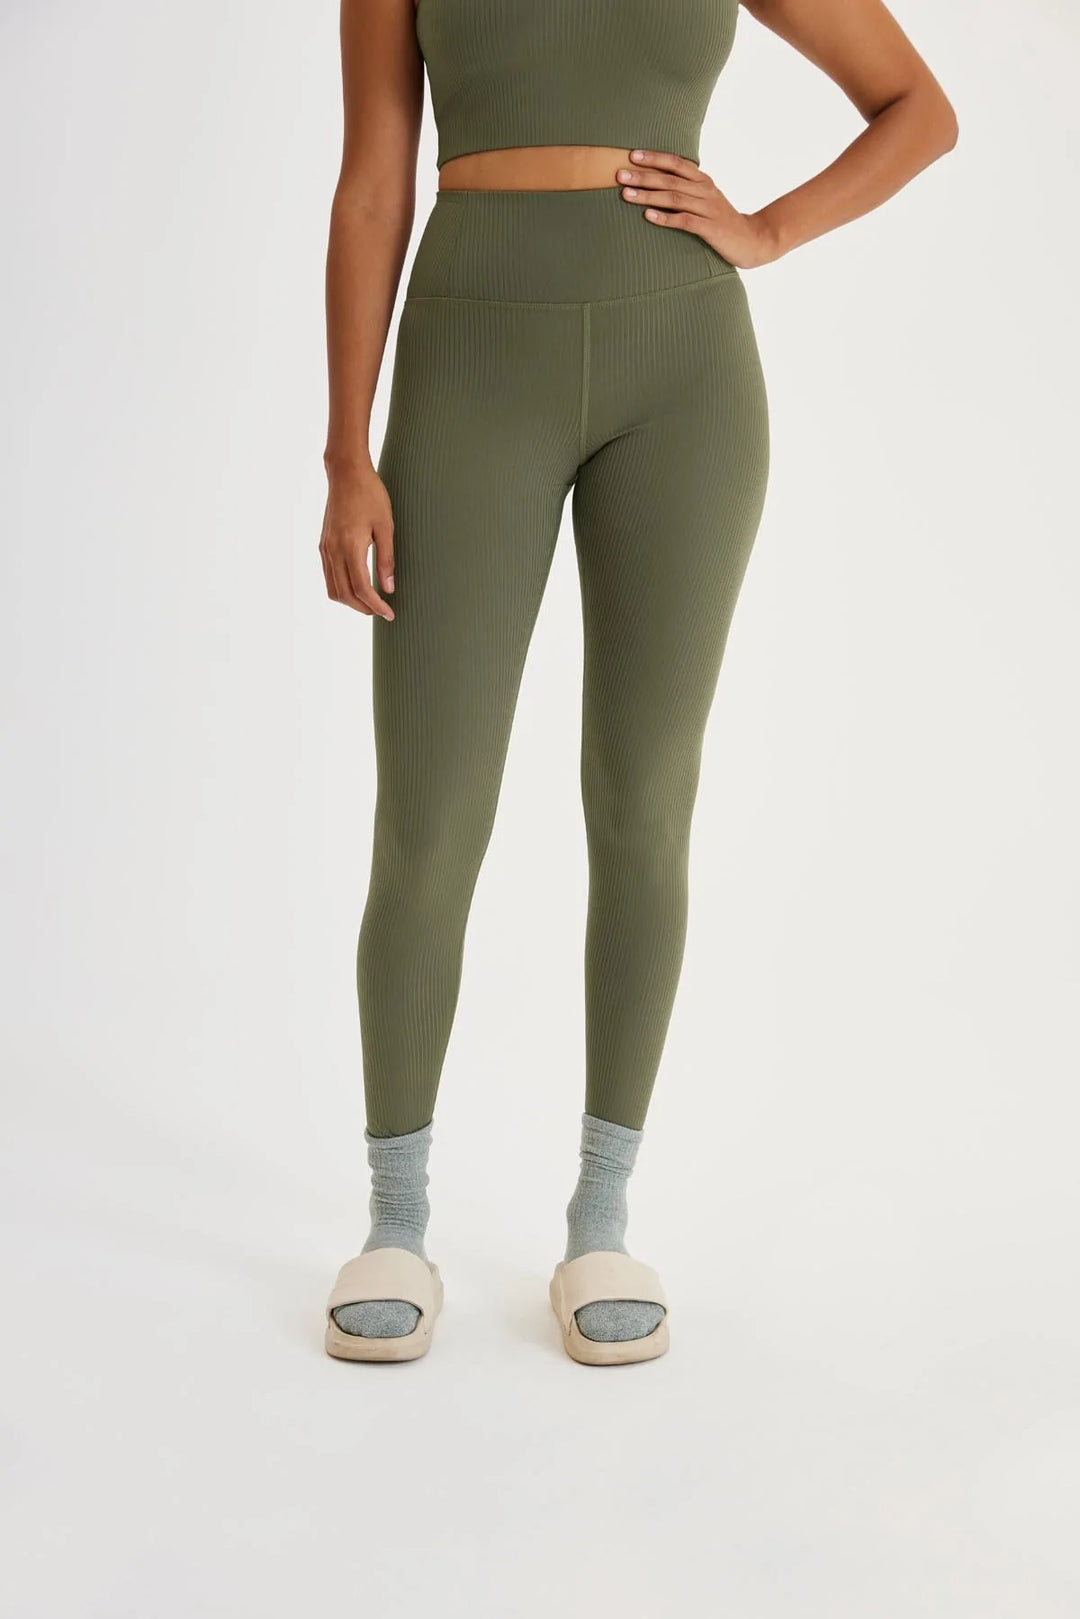 Girlfriend Collective | High Rise Ribbed Legging - Cypress